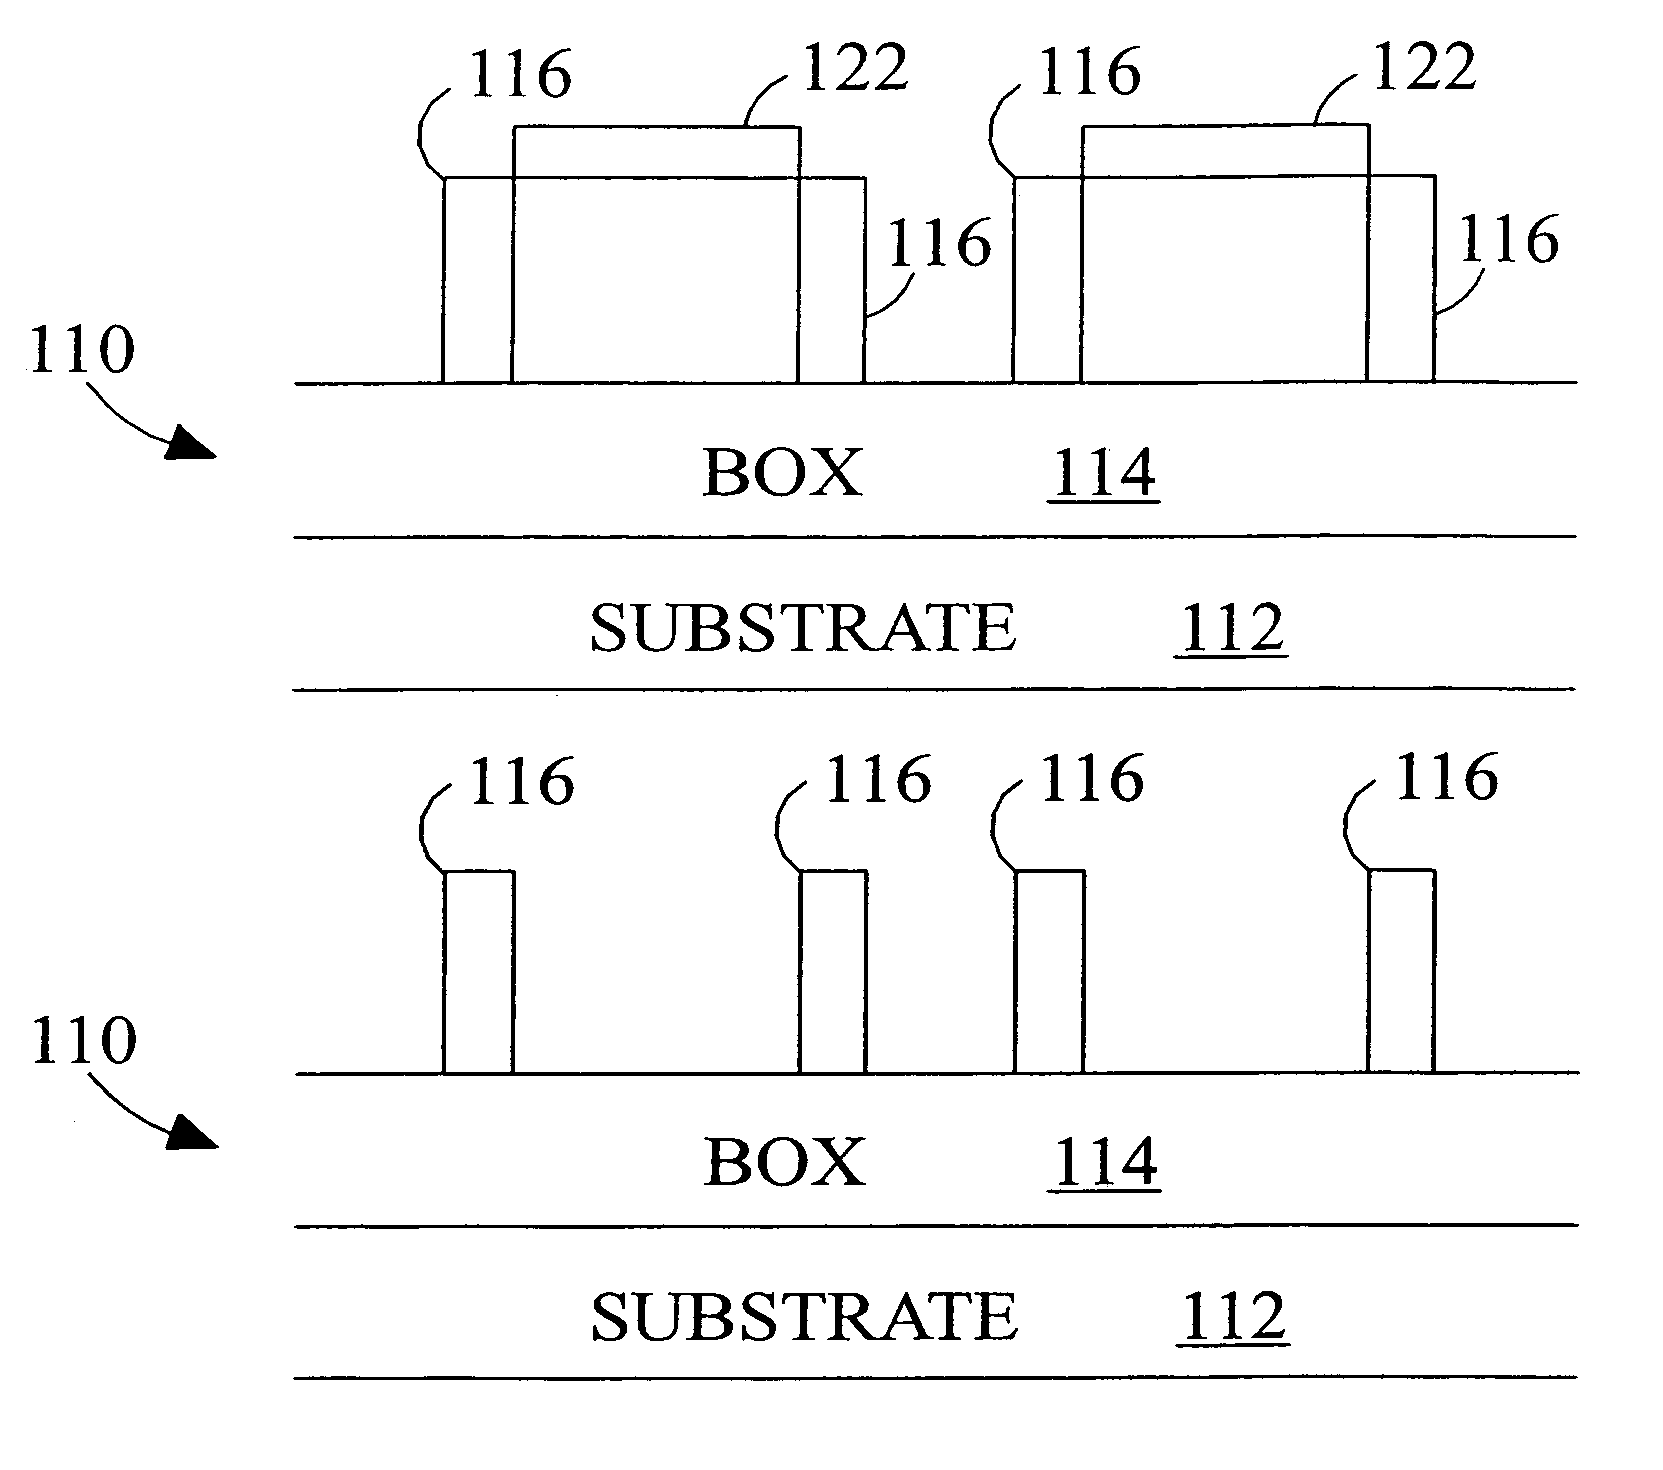 Formation of finFET using a sidewall epitaxial layer